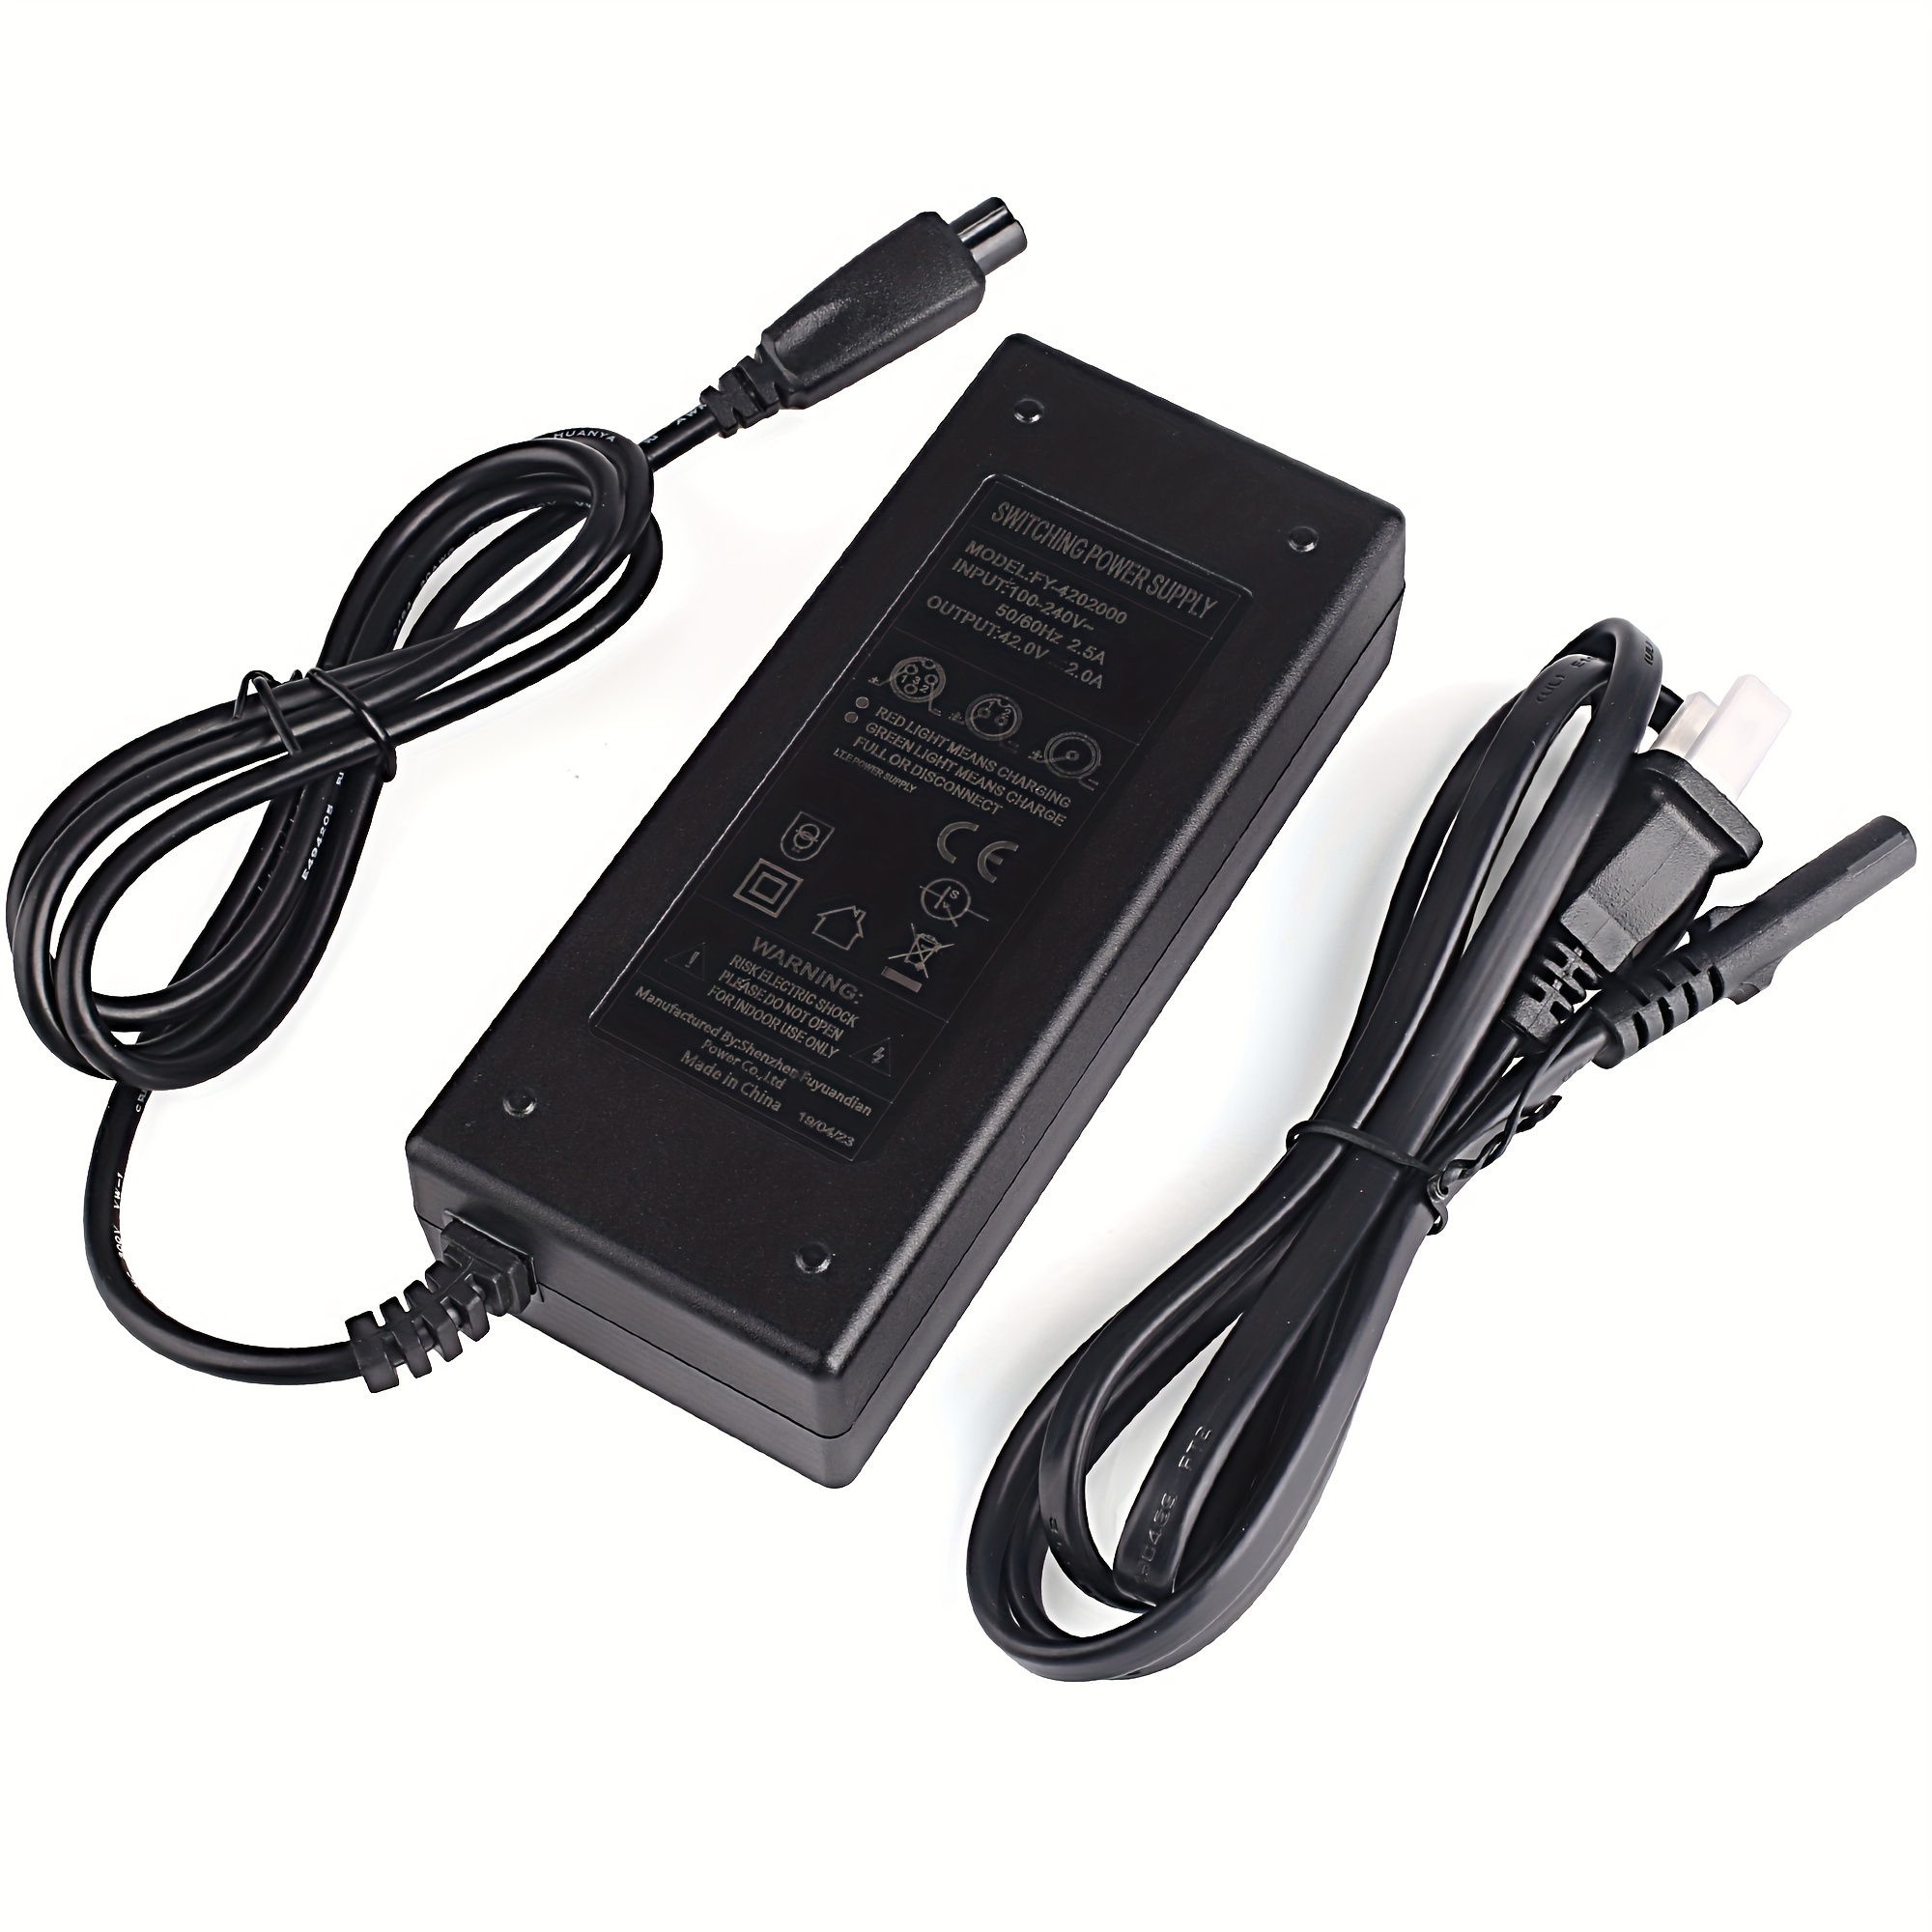 

Lotfancy 42v 2a Lithium Battery Charger For Hoverboard Model Lw-084/200/420/002 3-prong, For T1 T3 T6 Power Supply Cord